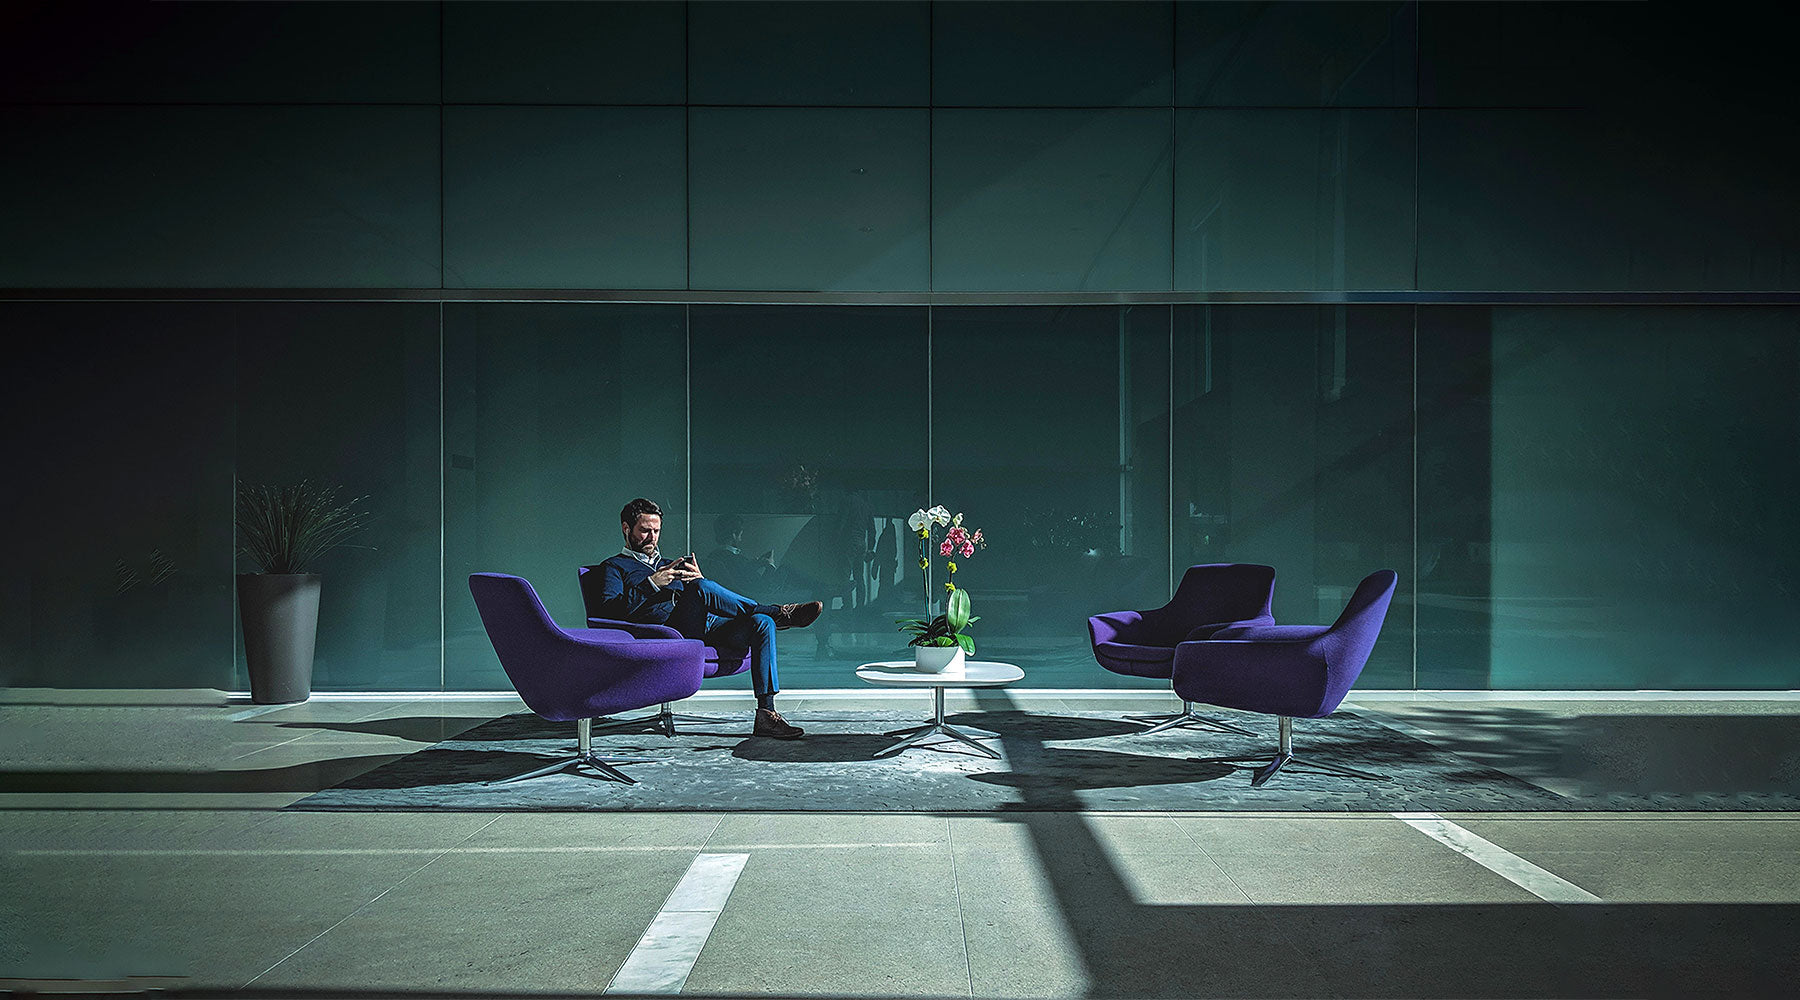 man seated in spacious lobby with purple upholstered chairs